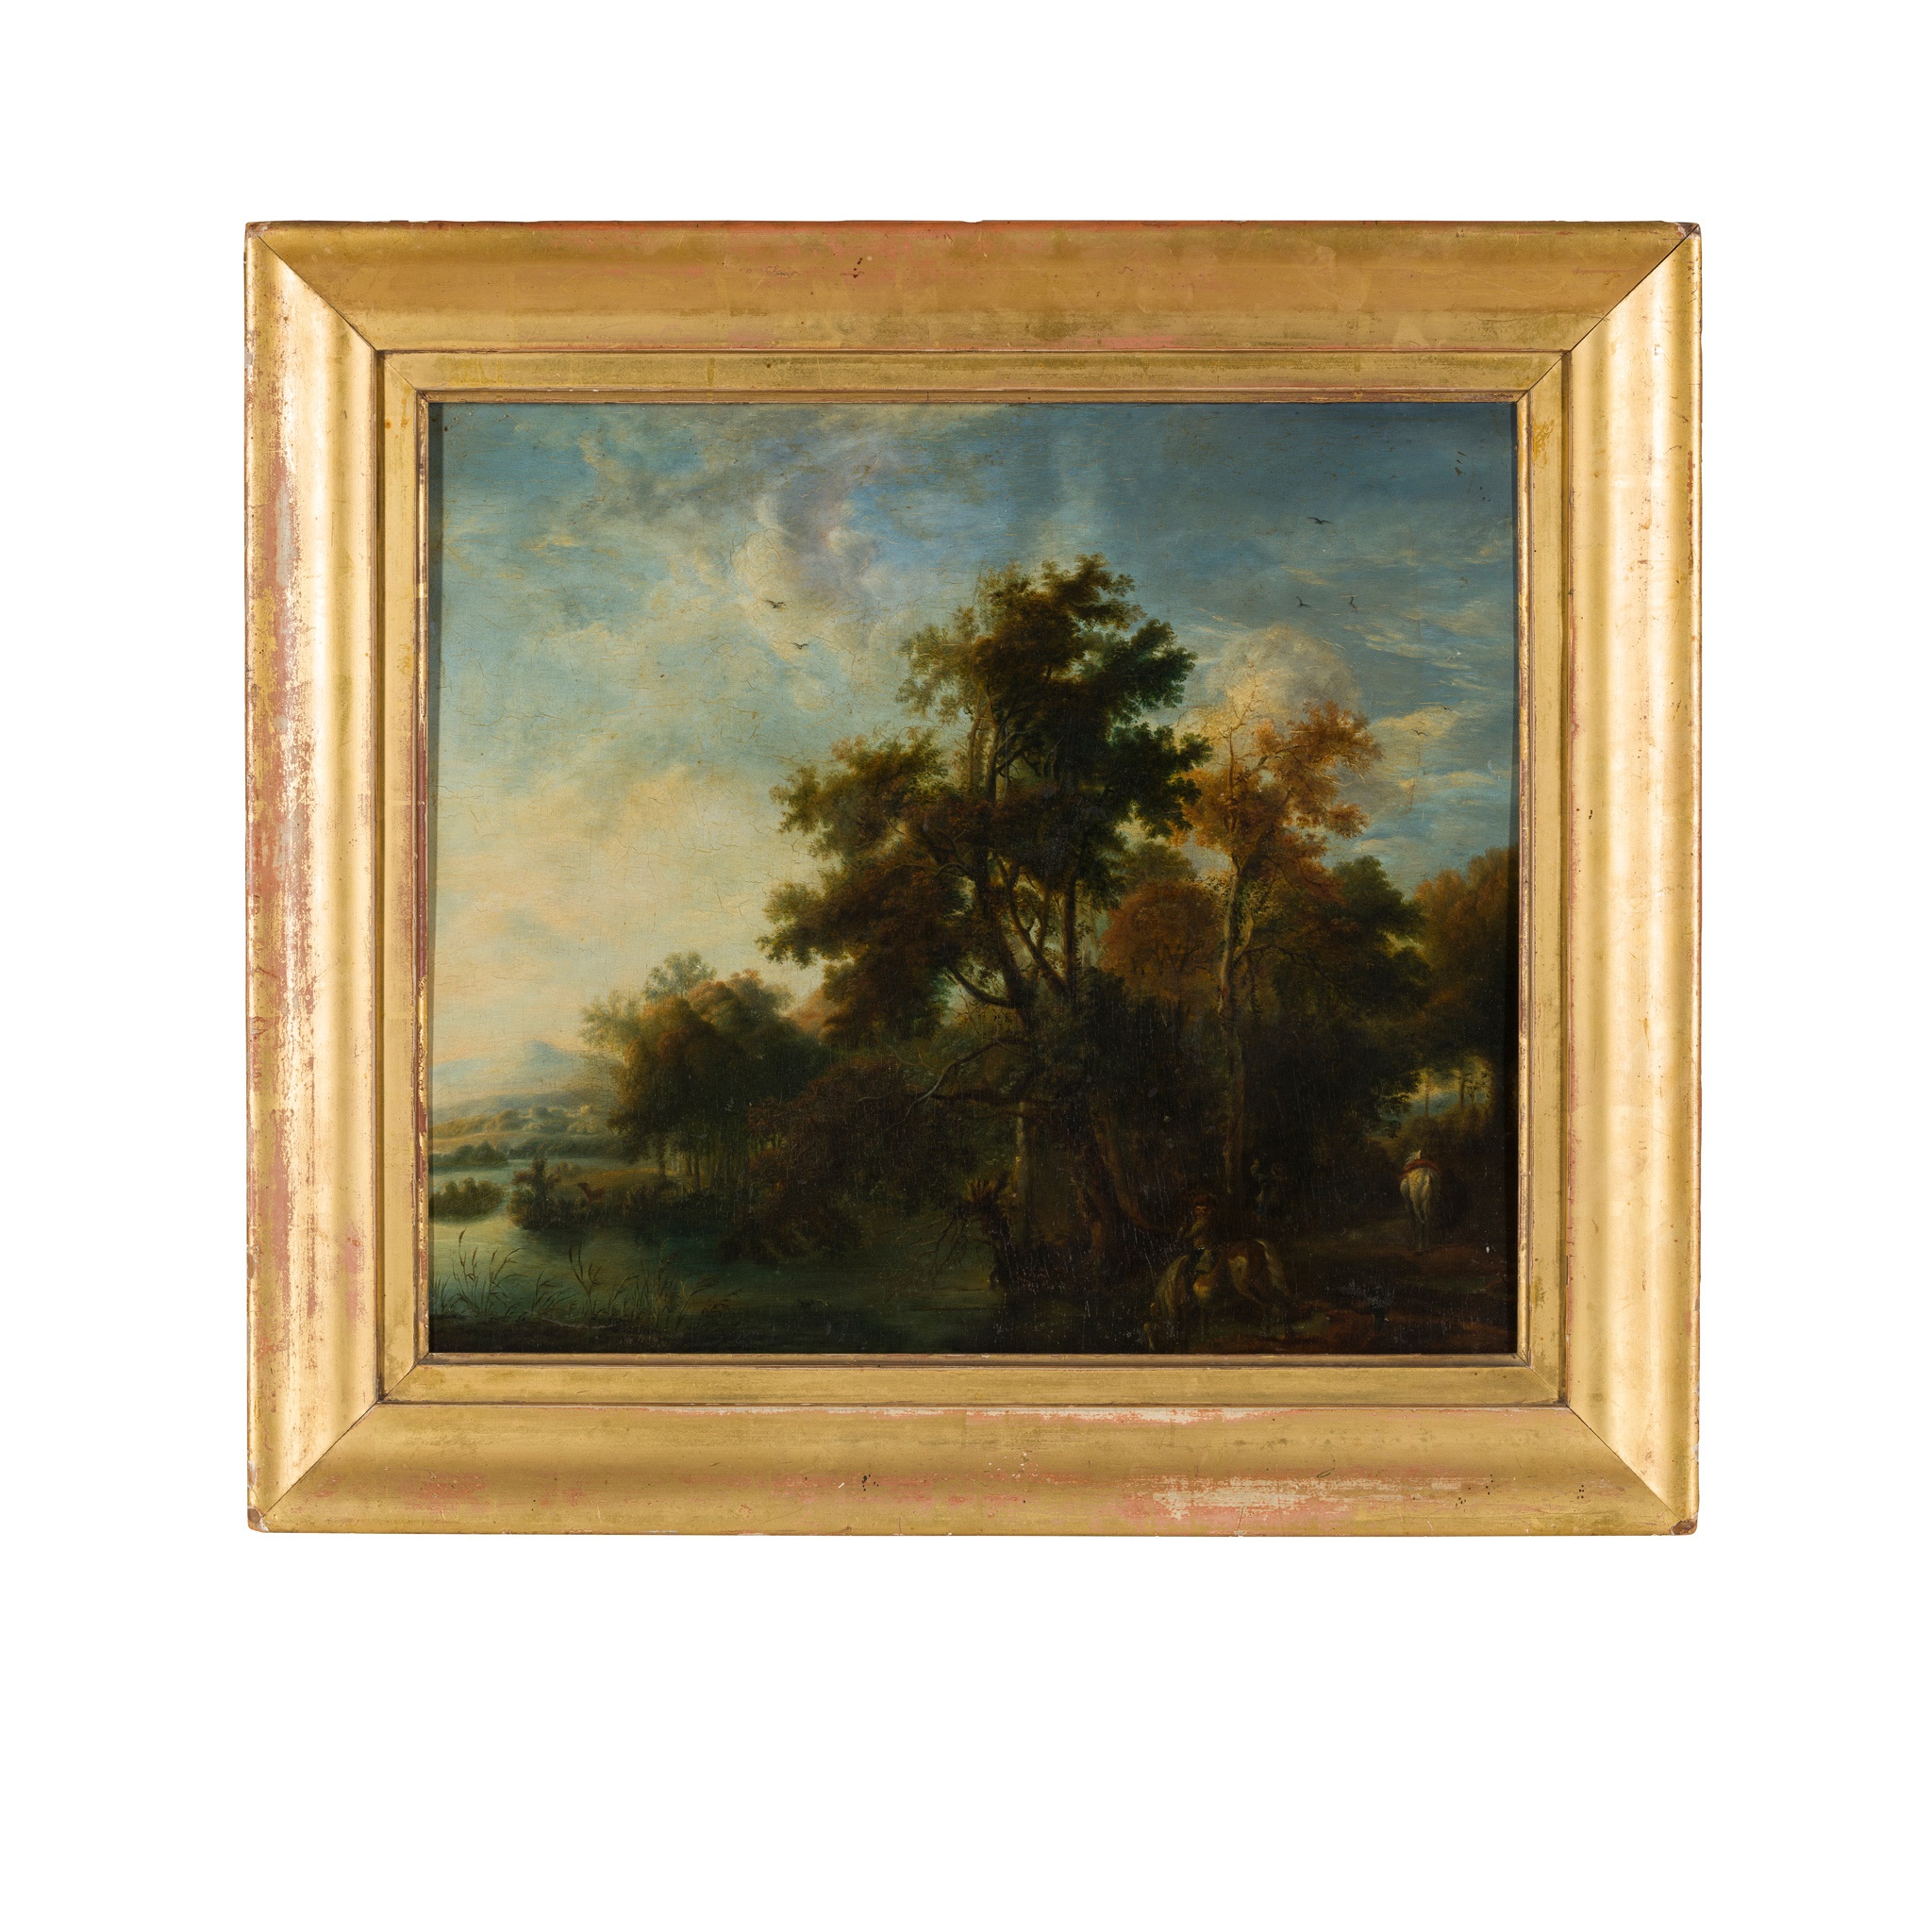 AFTER WOUVERMANS (DUTCH 18TH CENTURY) ITALIANATE LANDSCAPE - Image 2 of 2